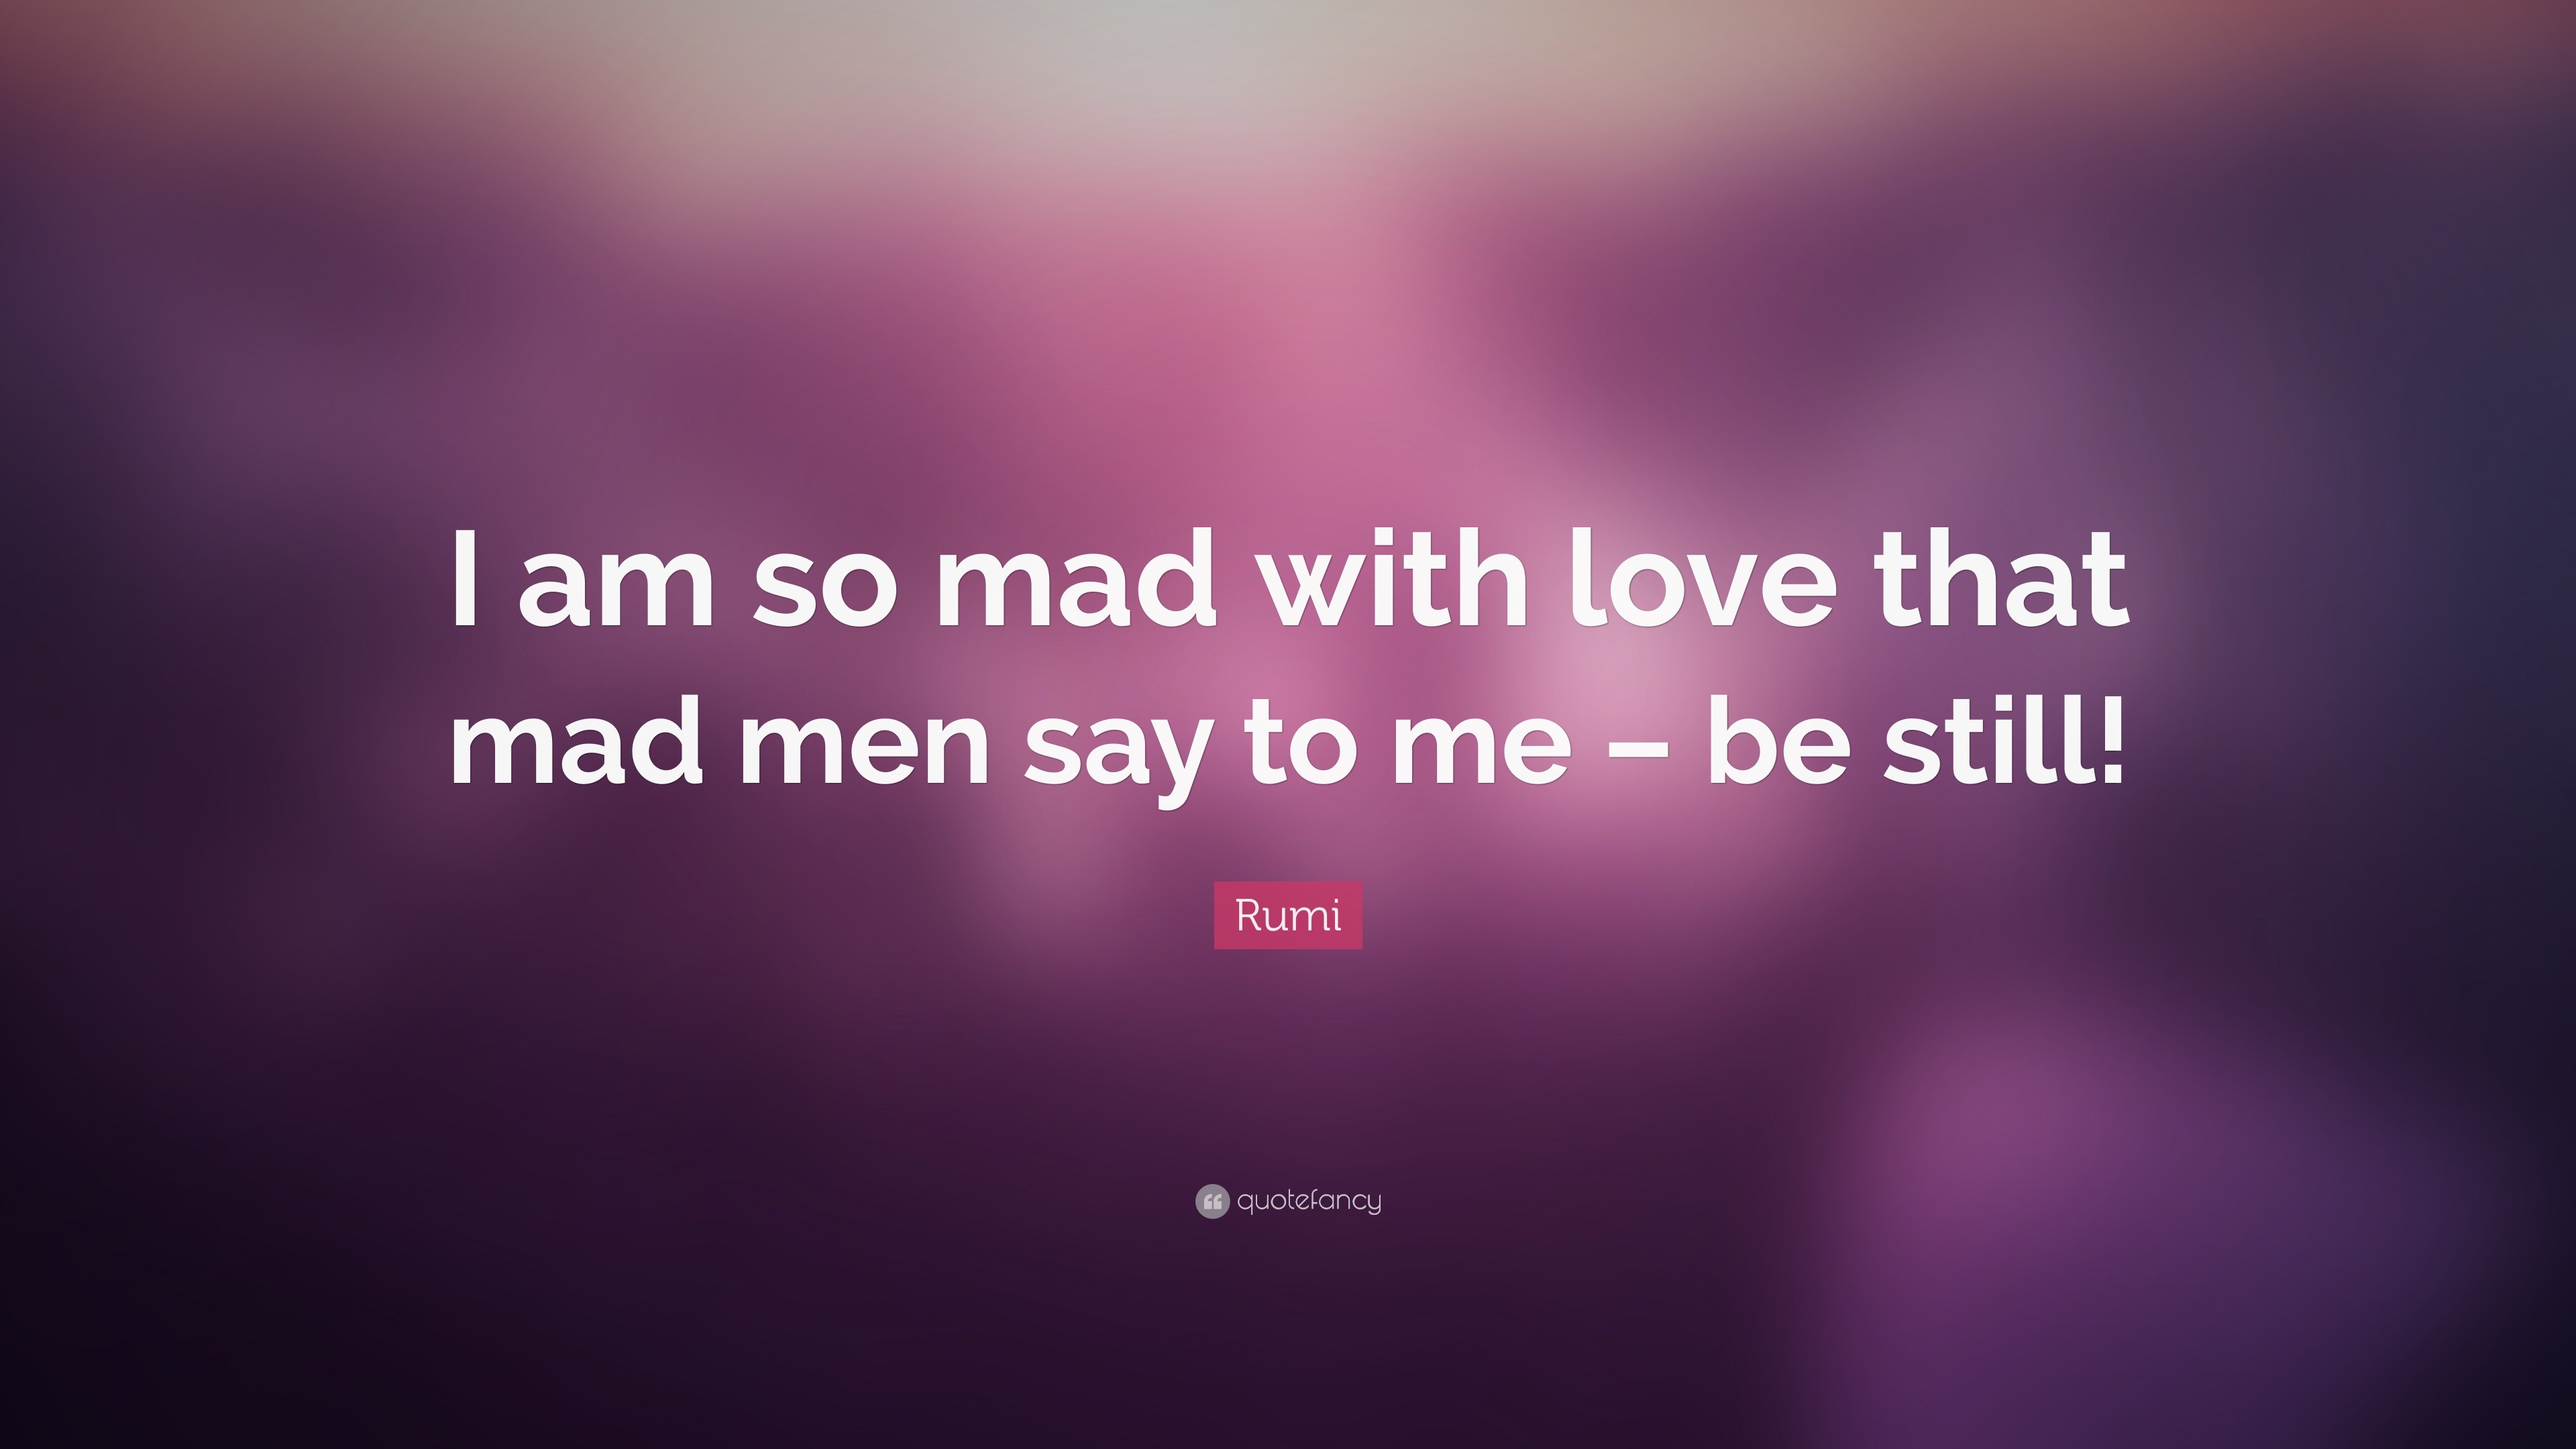 Rumi Quote: "I am so mad with love that mad men say to me - be still!"